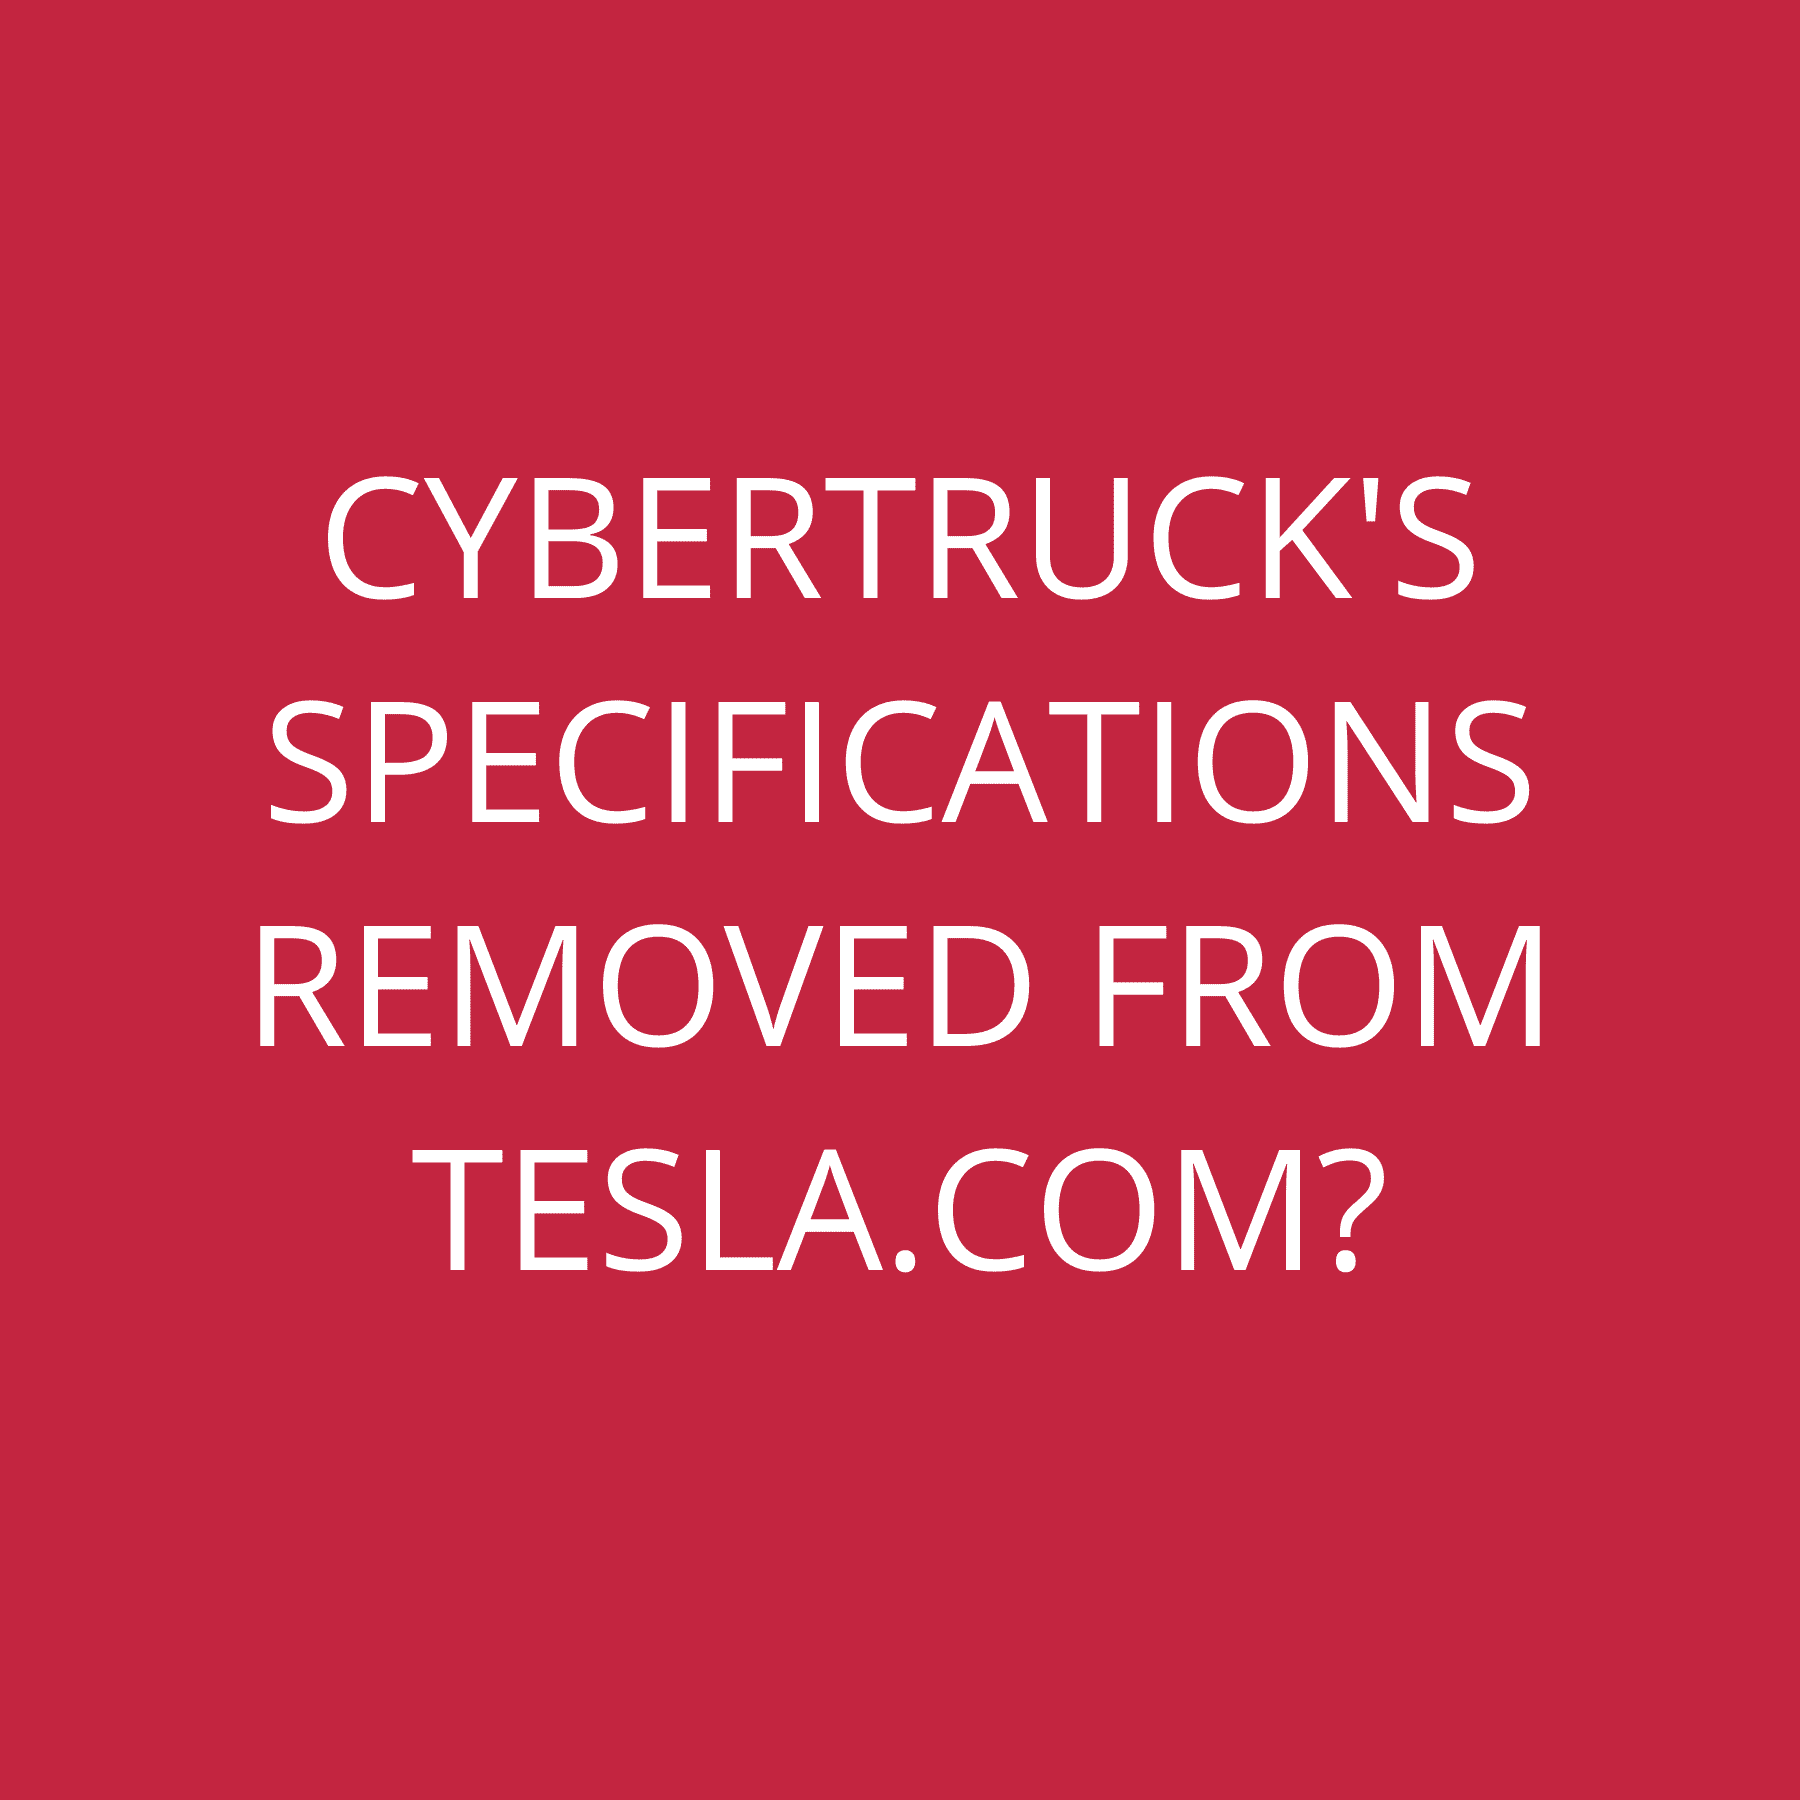 Cybertruck’s specifications removed from Tesla.com?